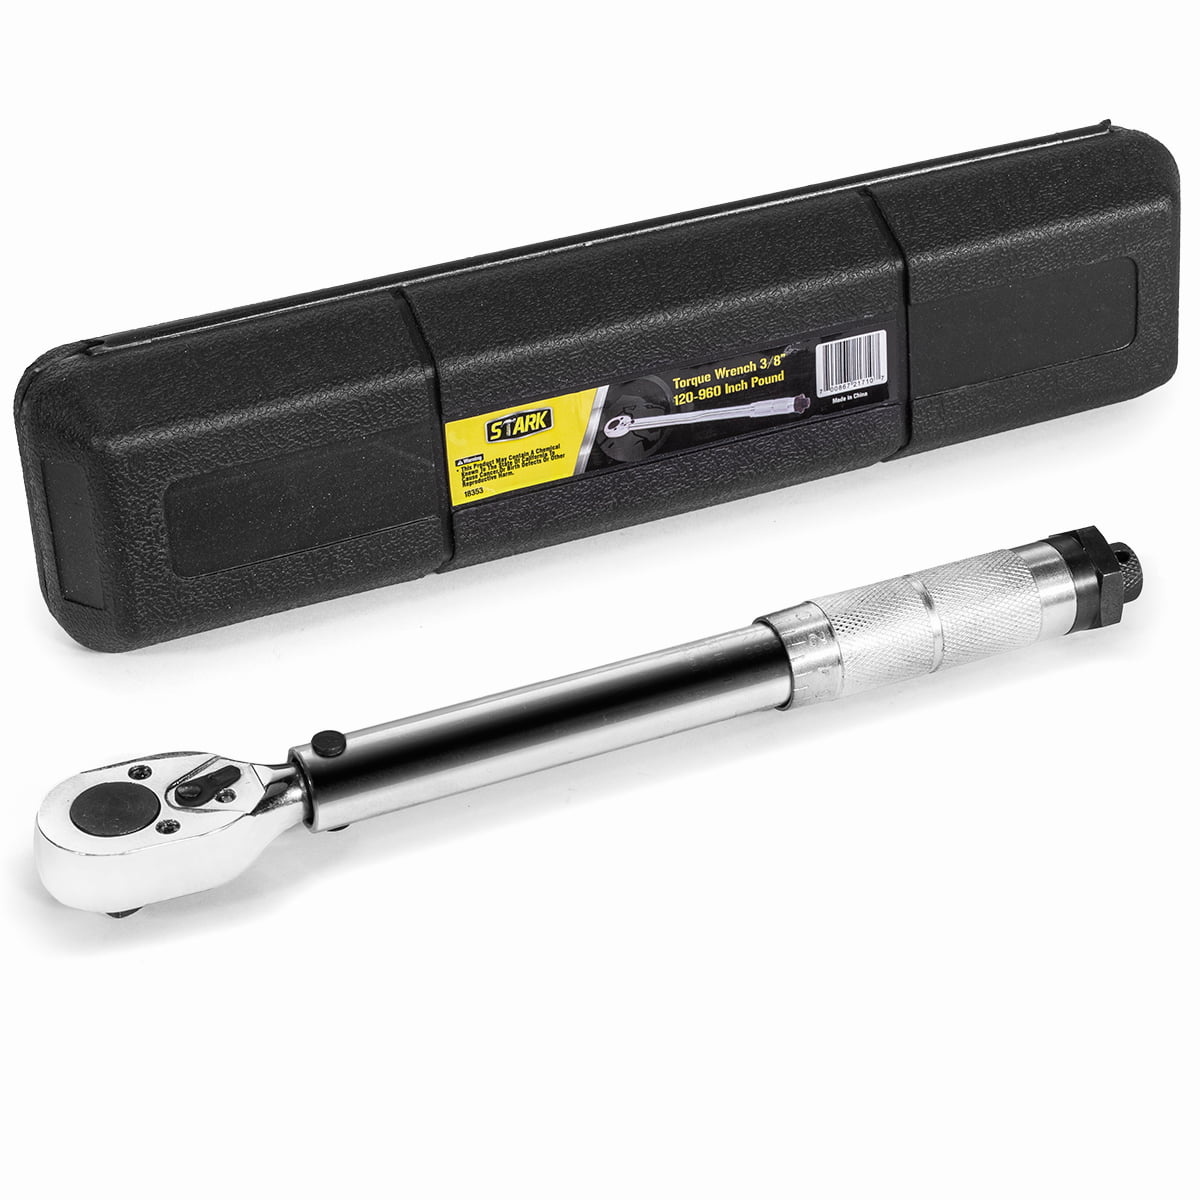 Adjustable Torque Wrench 40-250 In/Lb with Carrying Case Professional 3/8" Dr